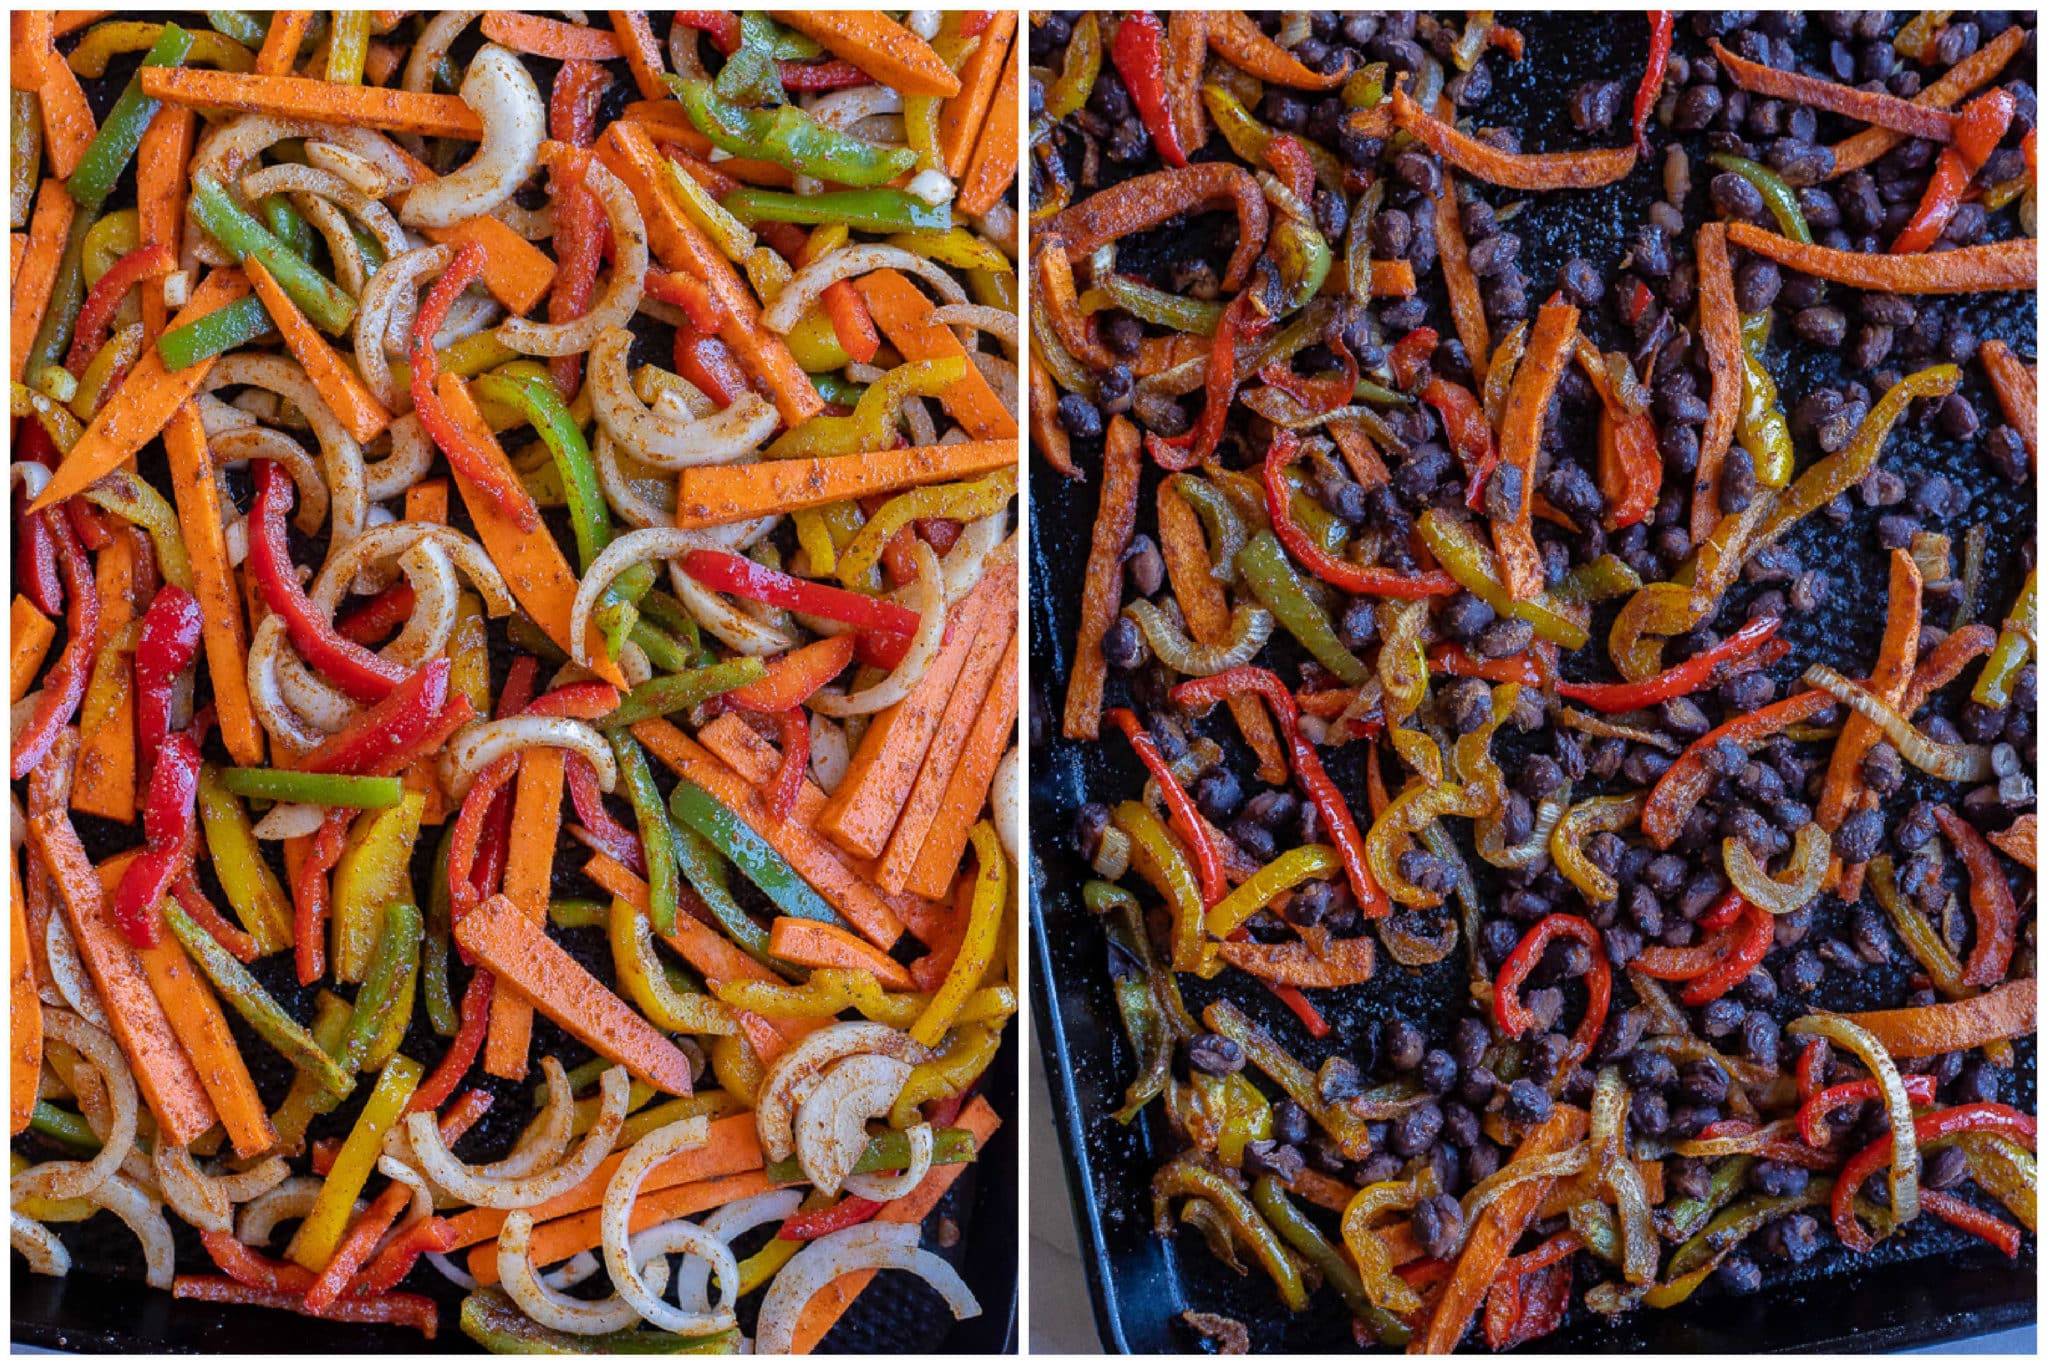 sheet pan fajitas before and after they've been baked in the oven